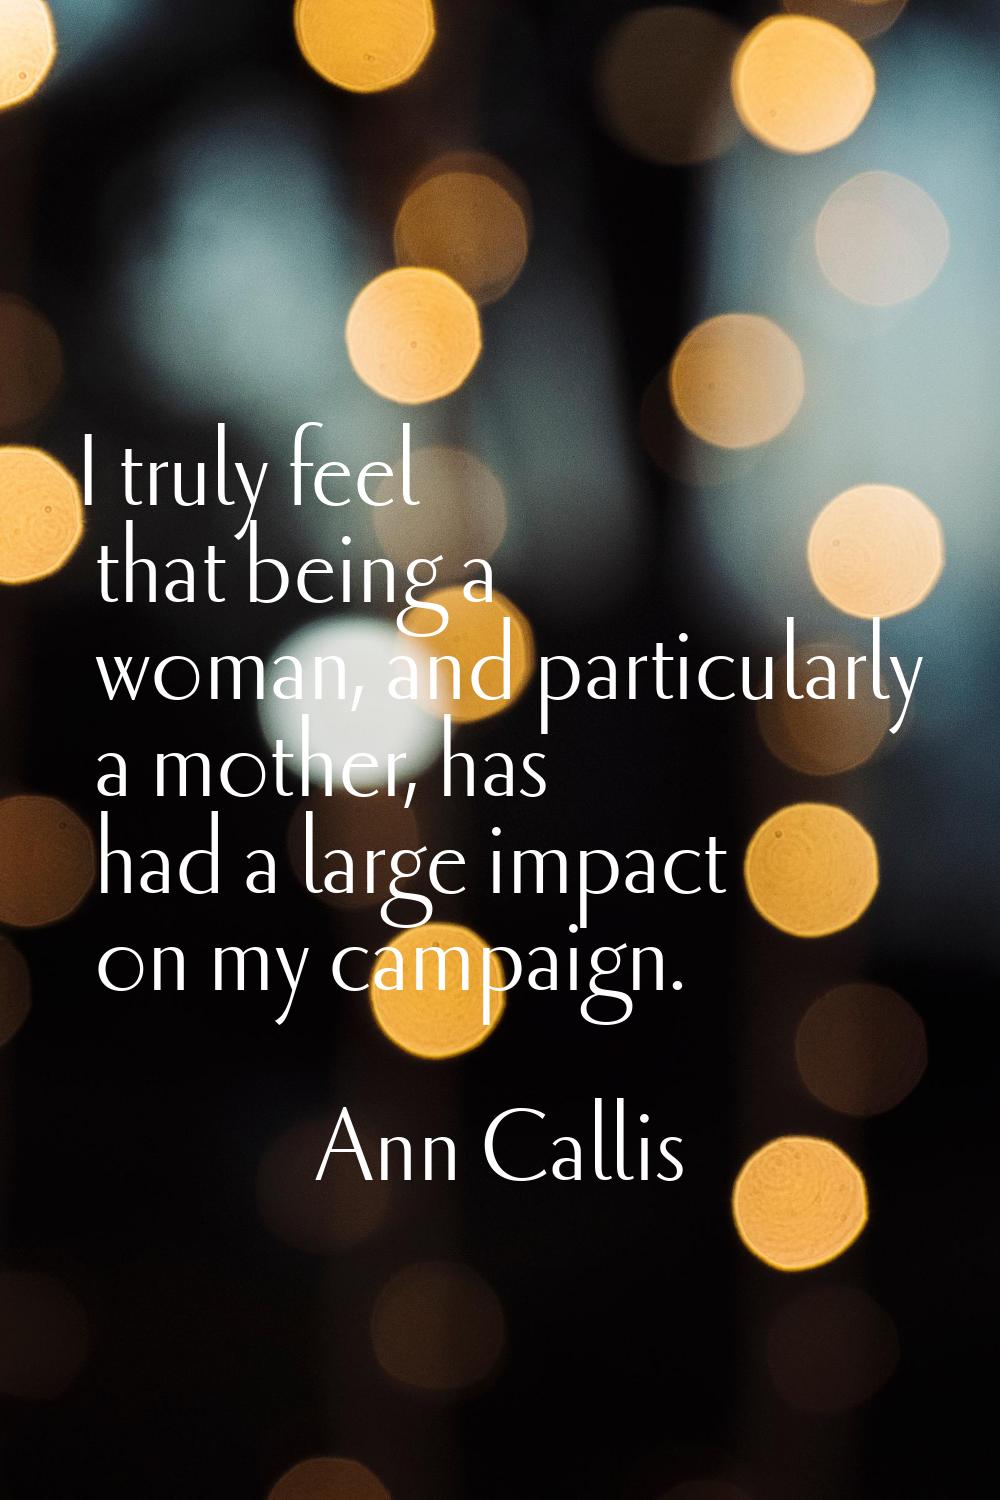 I truly feel that being a woman, and particularly a mother, has had a large impact on my campaign.